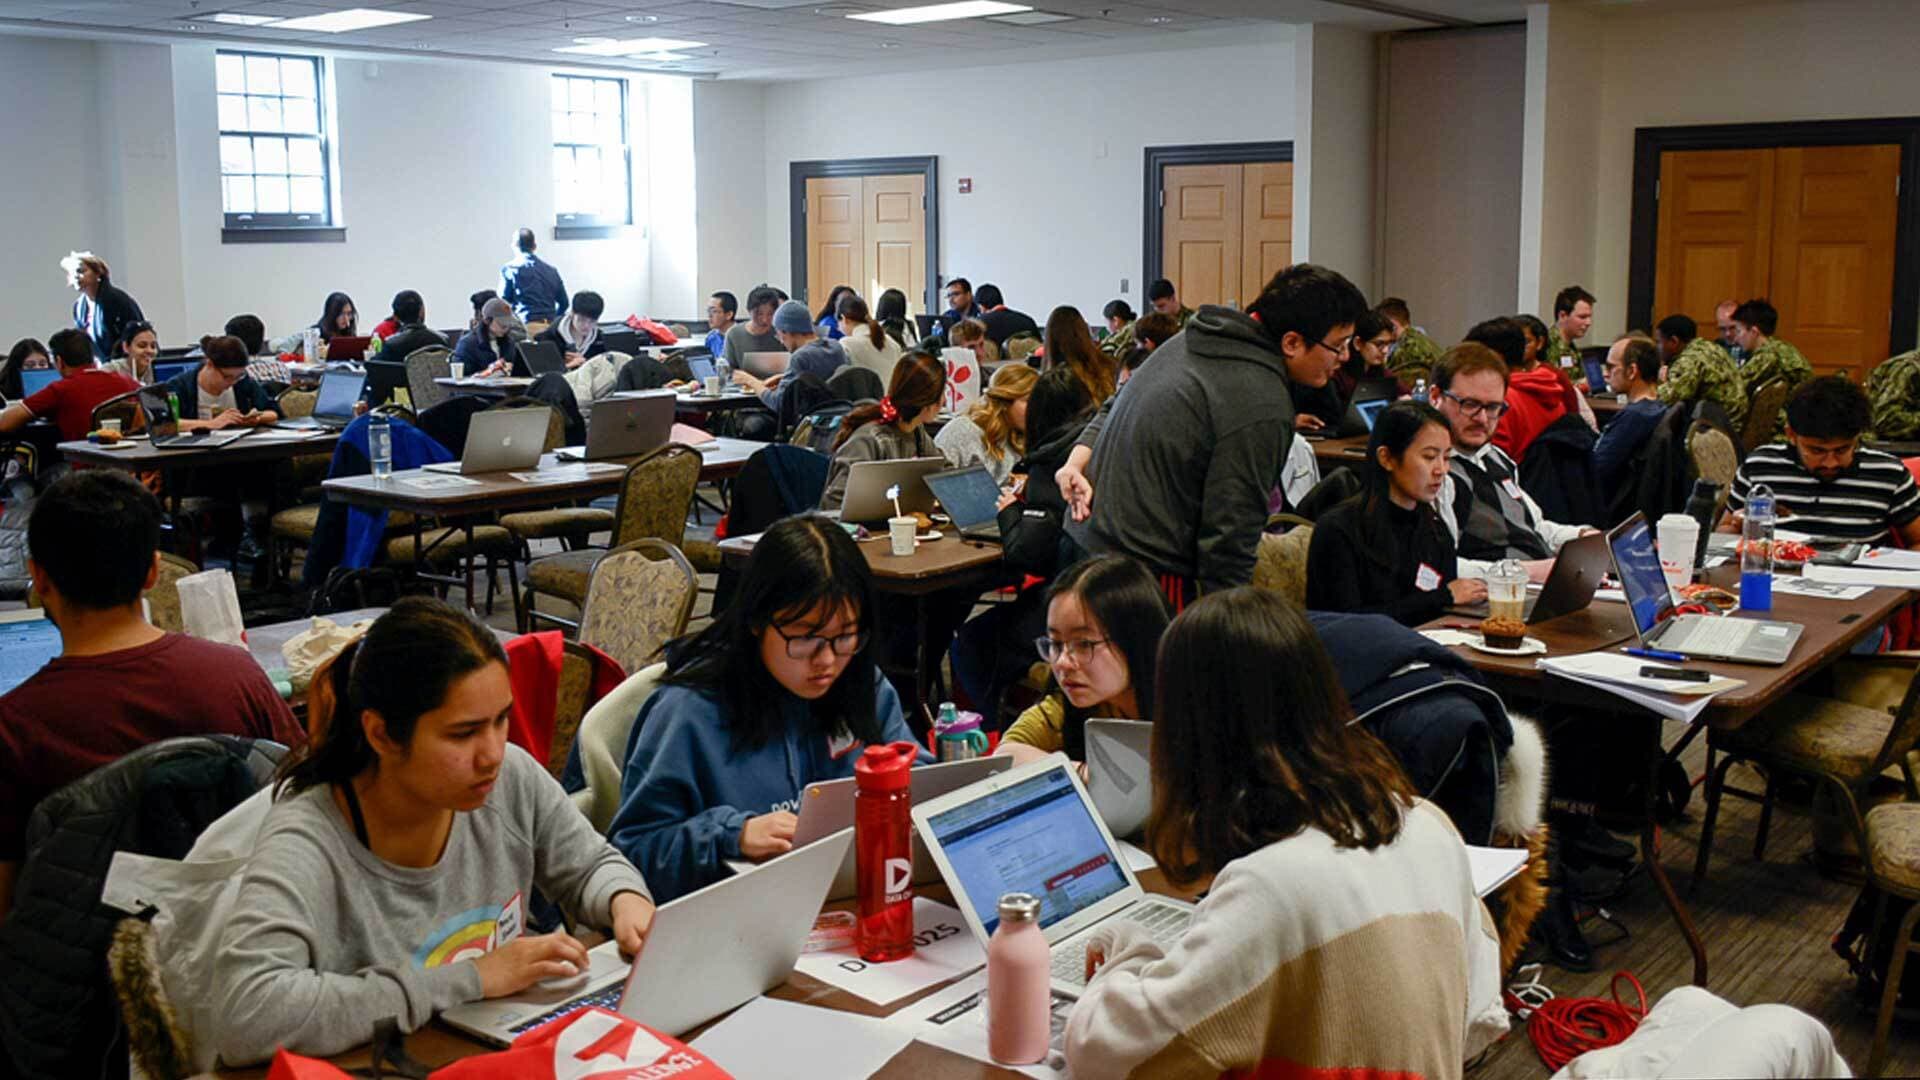 UMD’s third annual Data Challenge rallied 146 students from programs across campus to creatively transform data into information that could be used to tackle theme-specific challenges